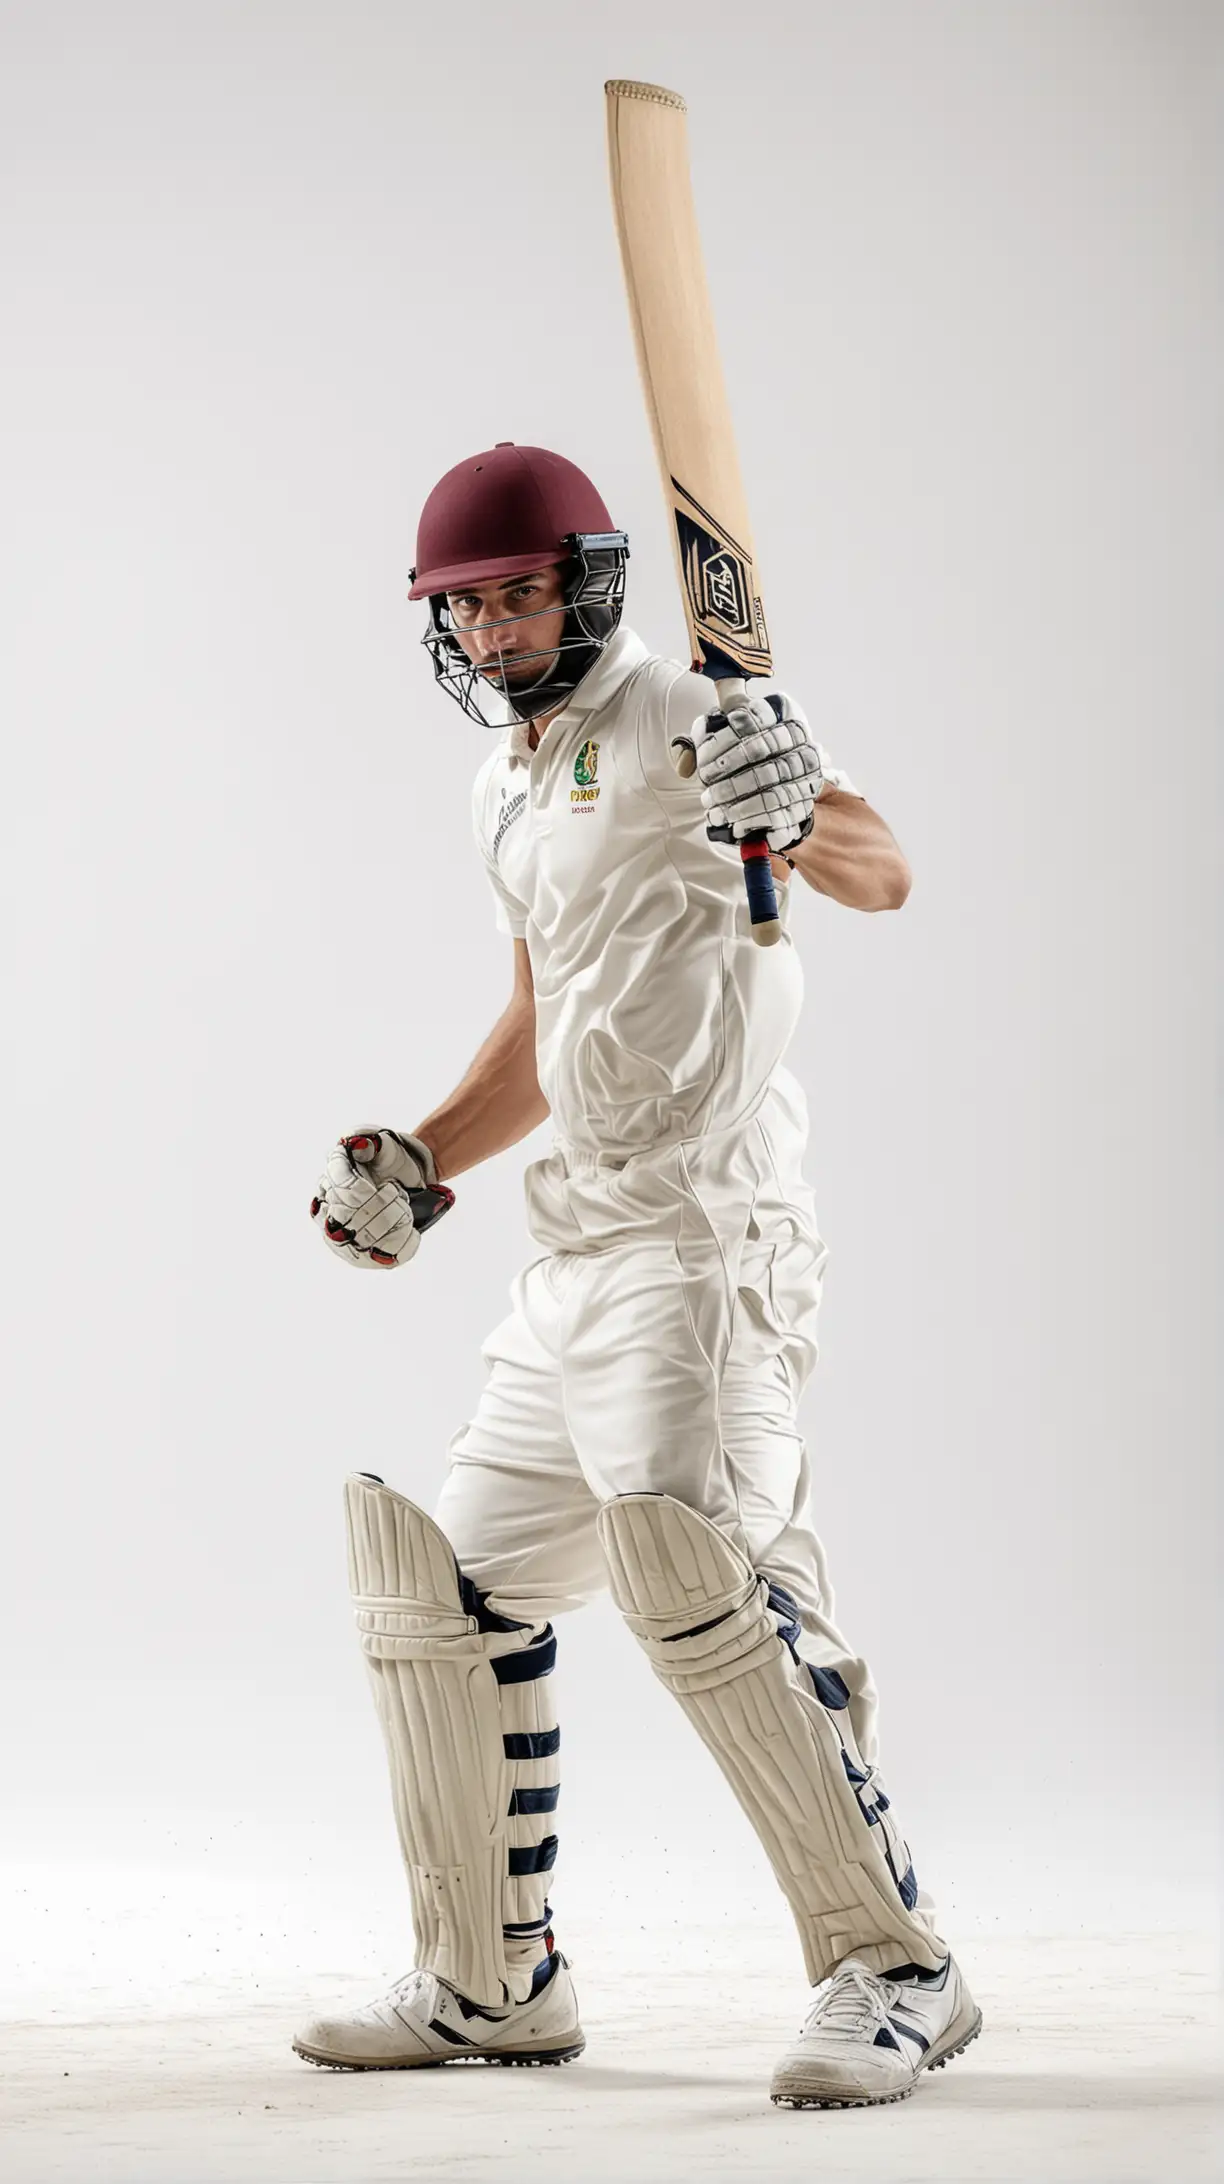 Dynamic Cricket Player in Action on White Background